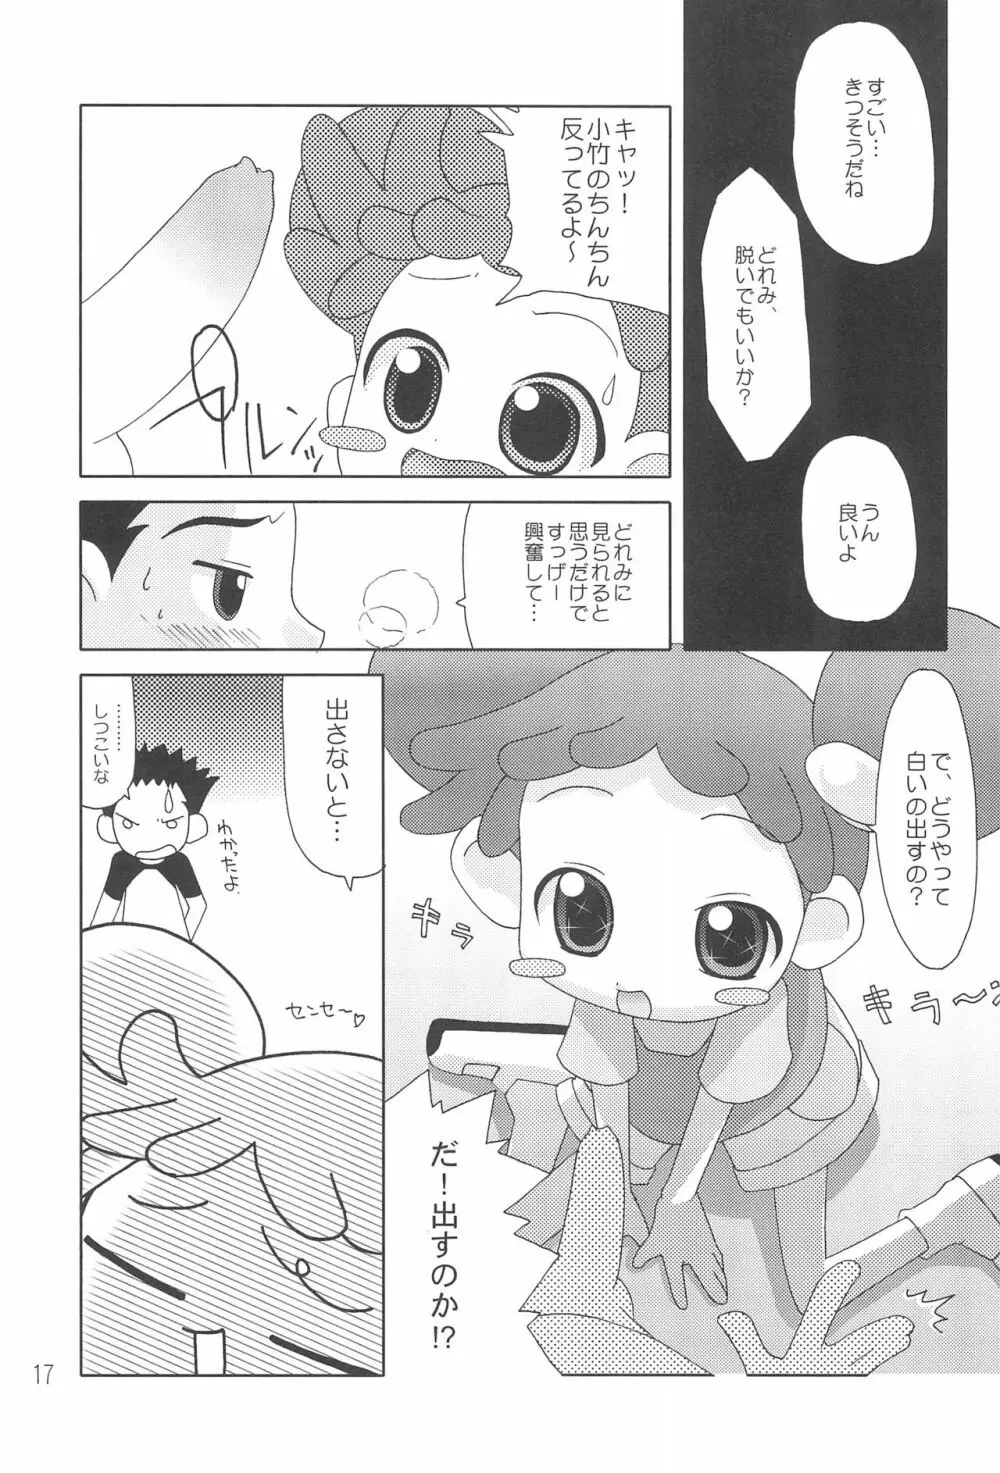 CDE 完全版 - page19